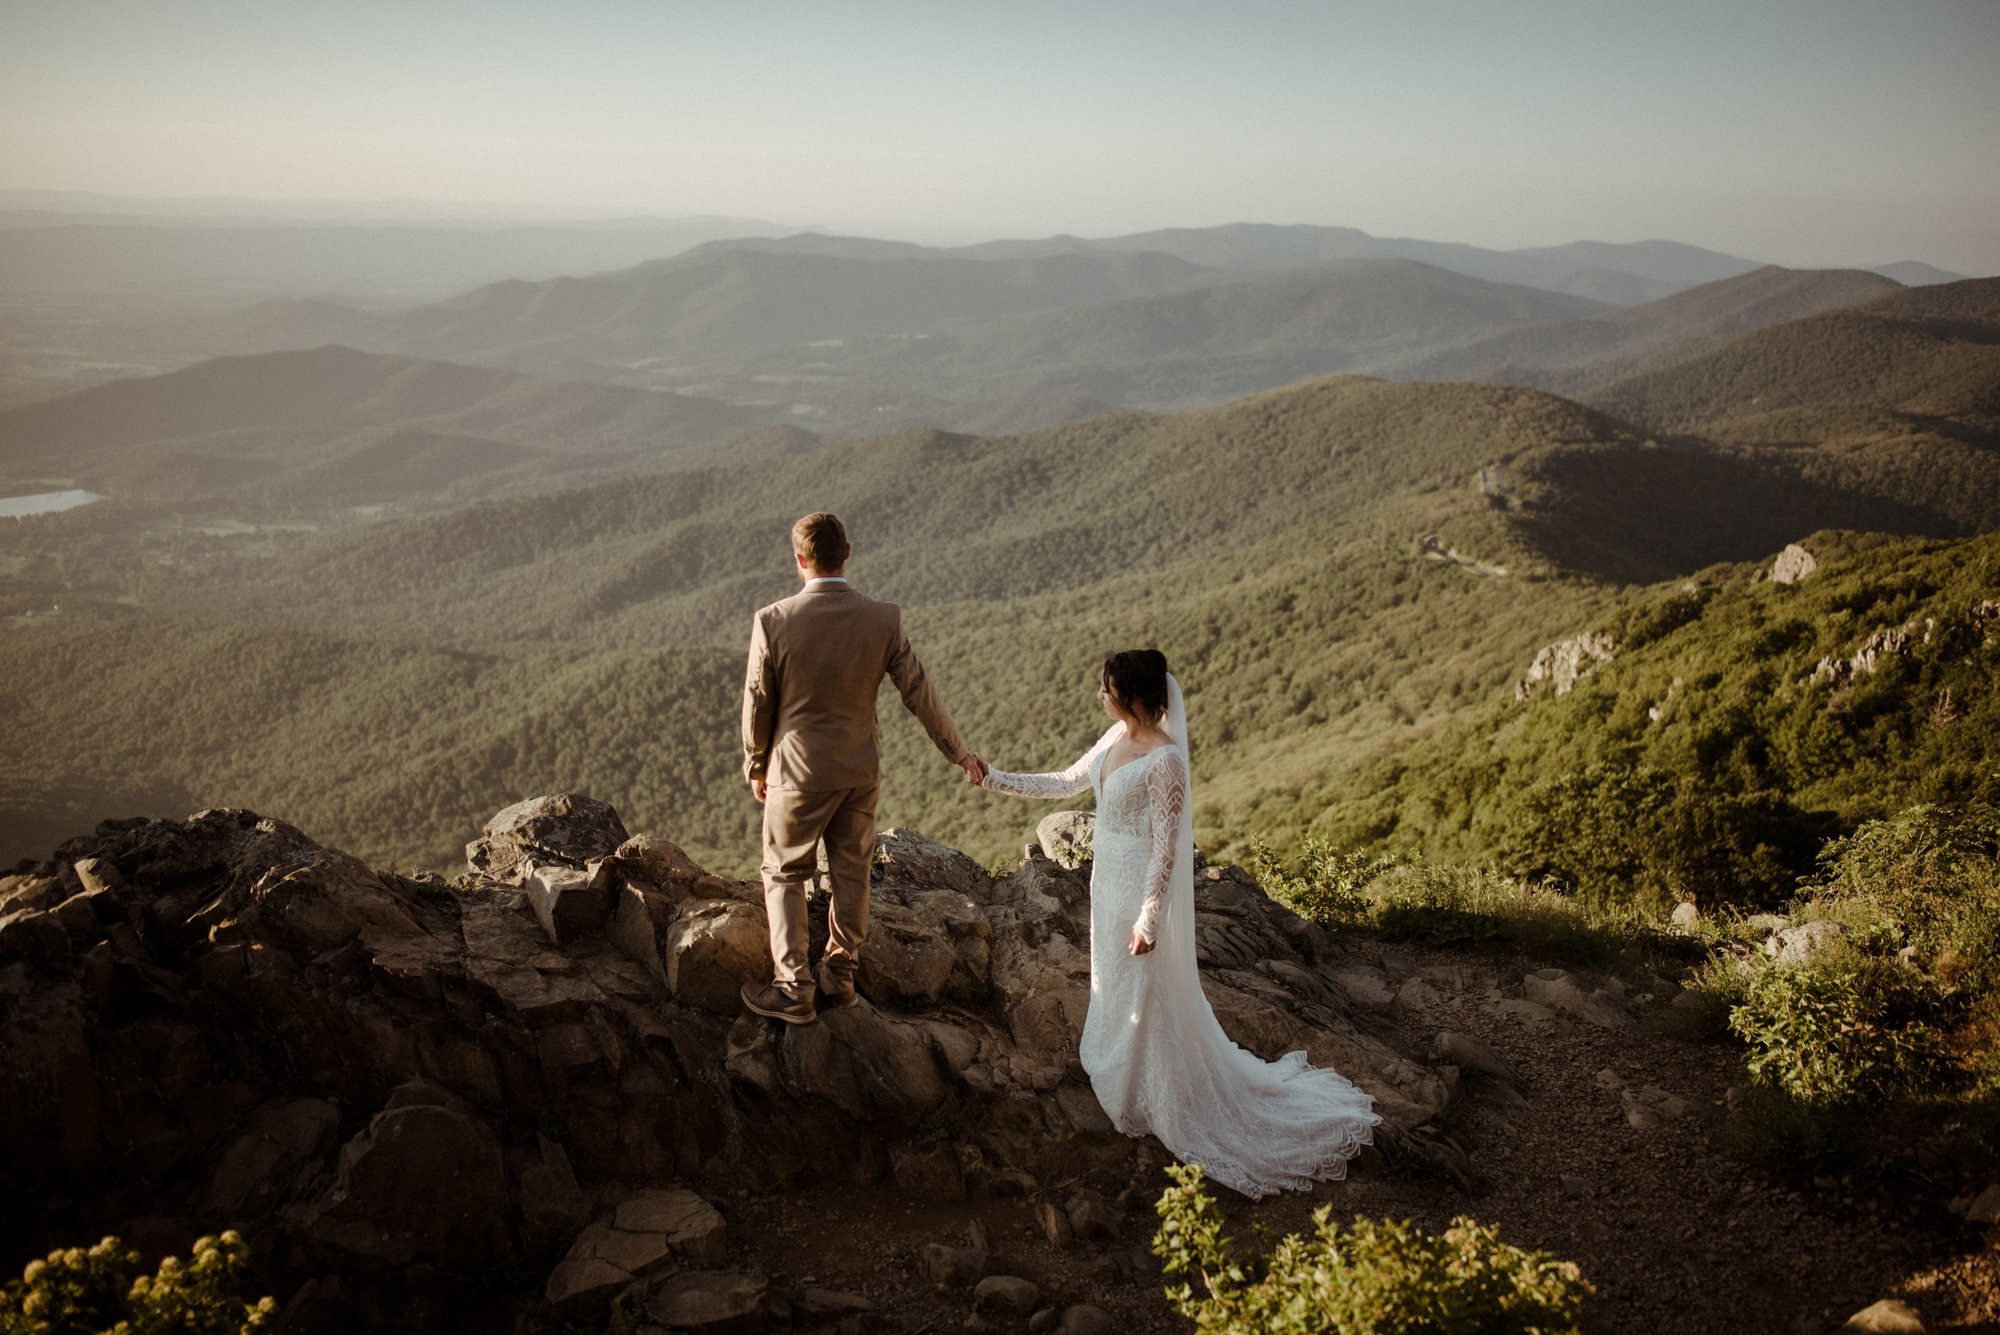 Sunset+Elopement+on+Stony+Man+Summit+in+Shenandoah+National+Park+-+White+Sails+Creative+Elopement+Photography+-+July+Elopement+on+the+Blue+Ridge+Parkway_56.jpg